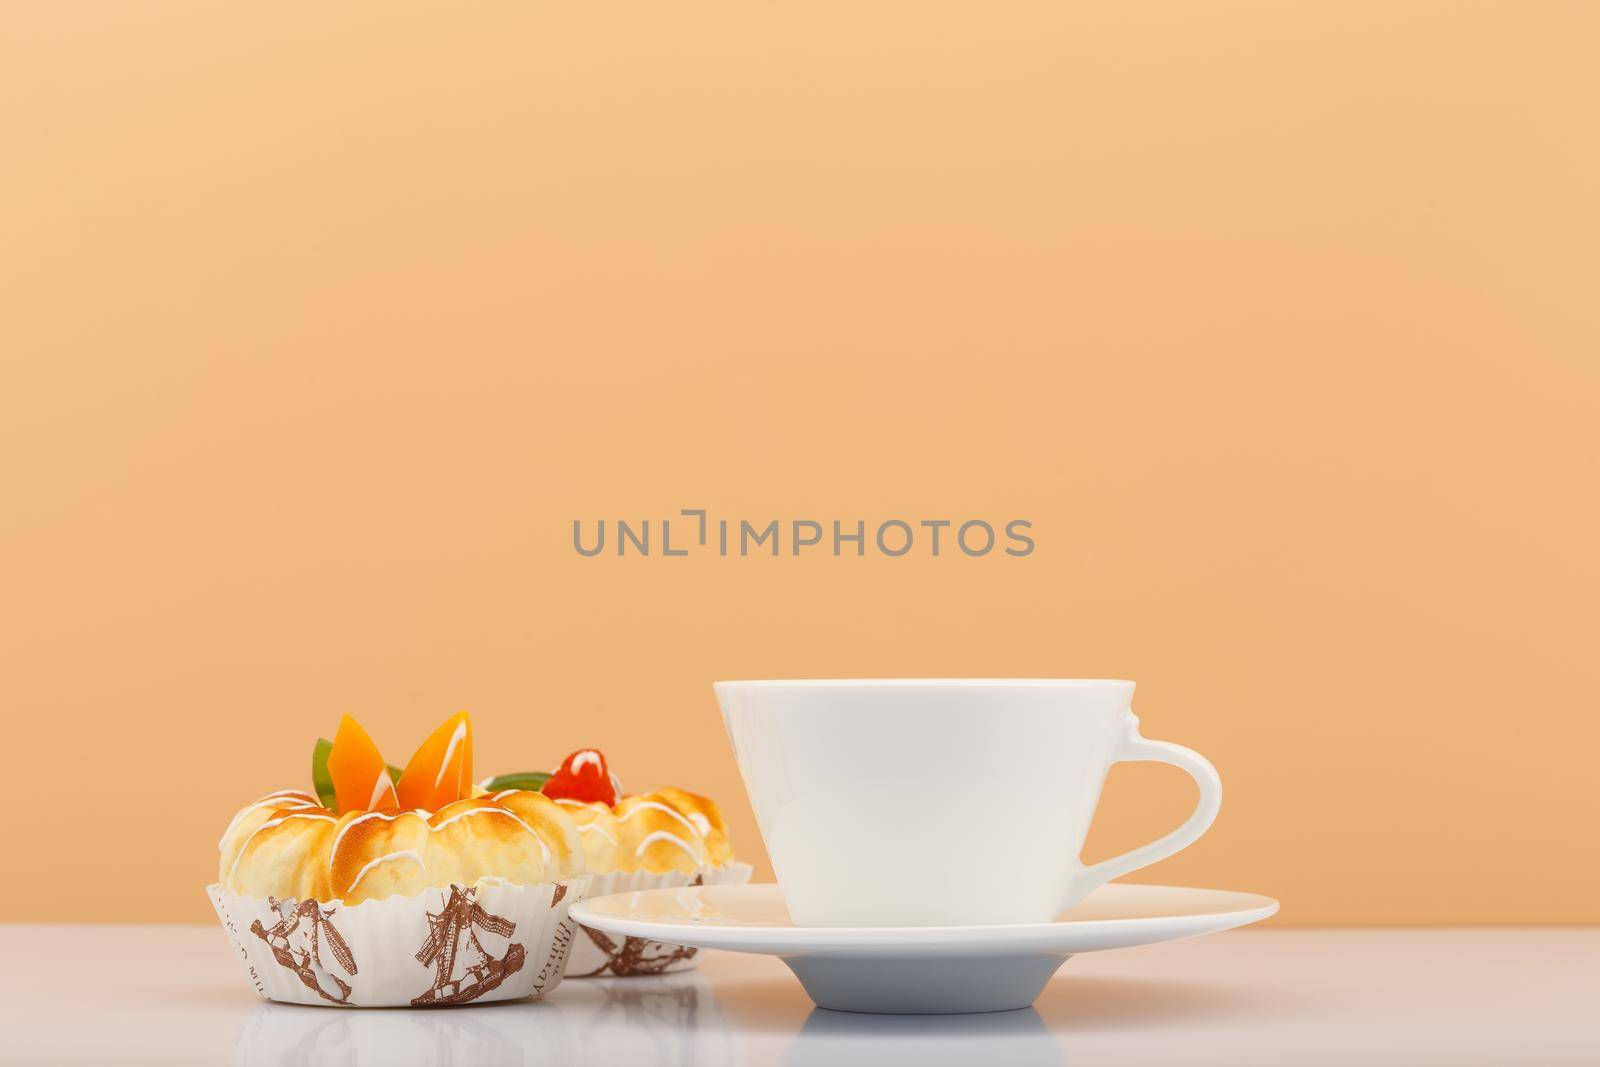 White ceramic tea or coffee cup with pastry next to it against beige background with copy space by Senorina_Irina